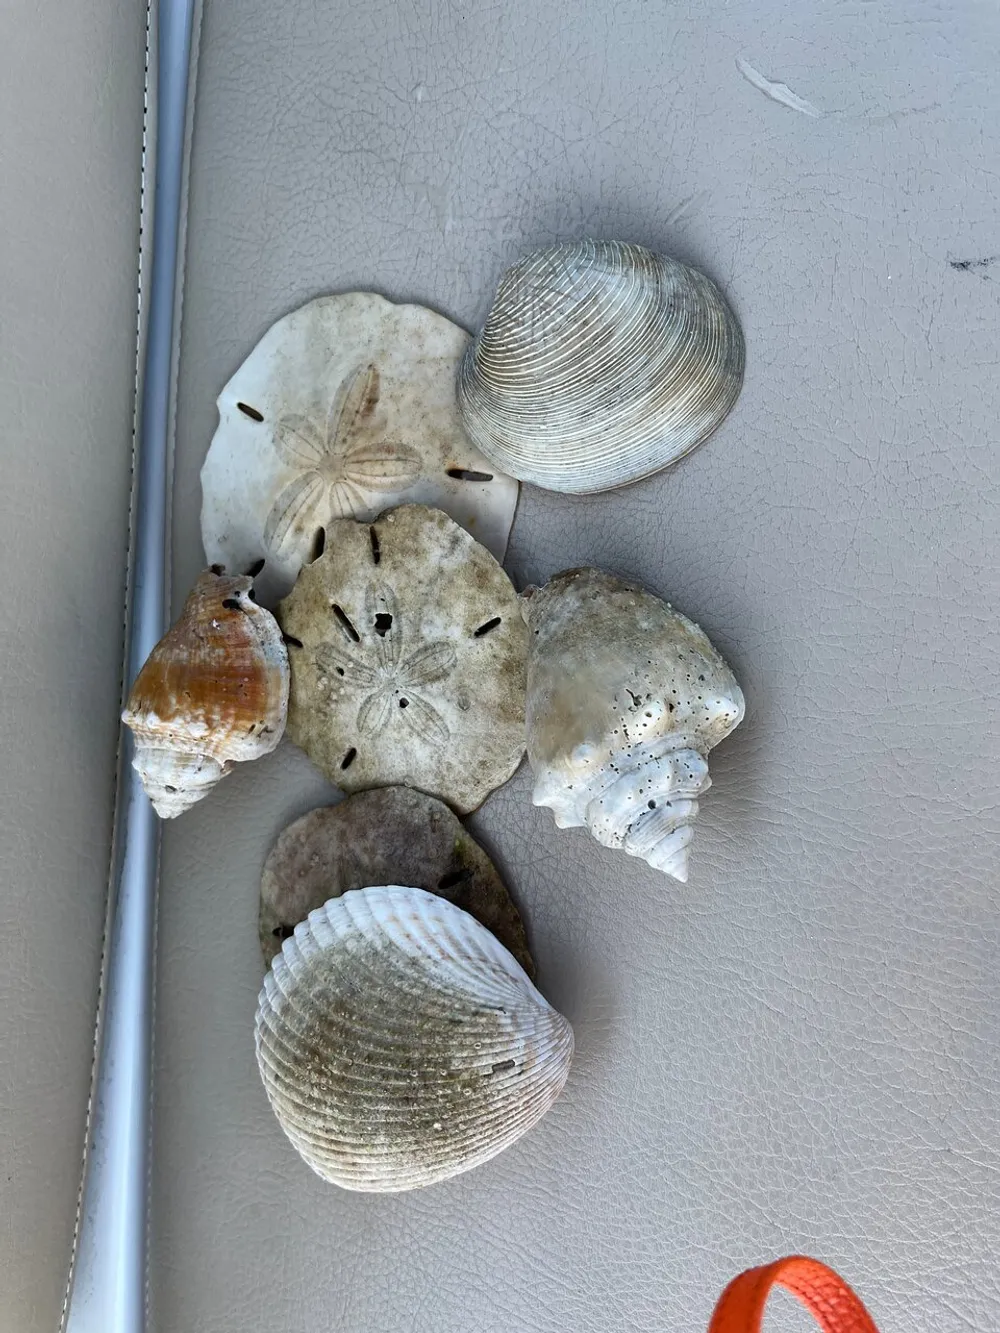 The image shows a collection of various seashells and sand dollars placed on a textured grey surface